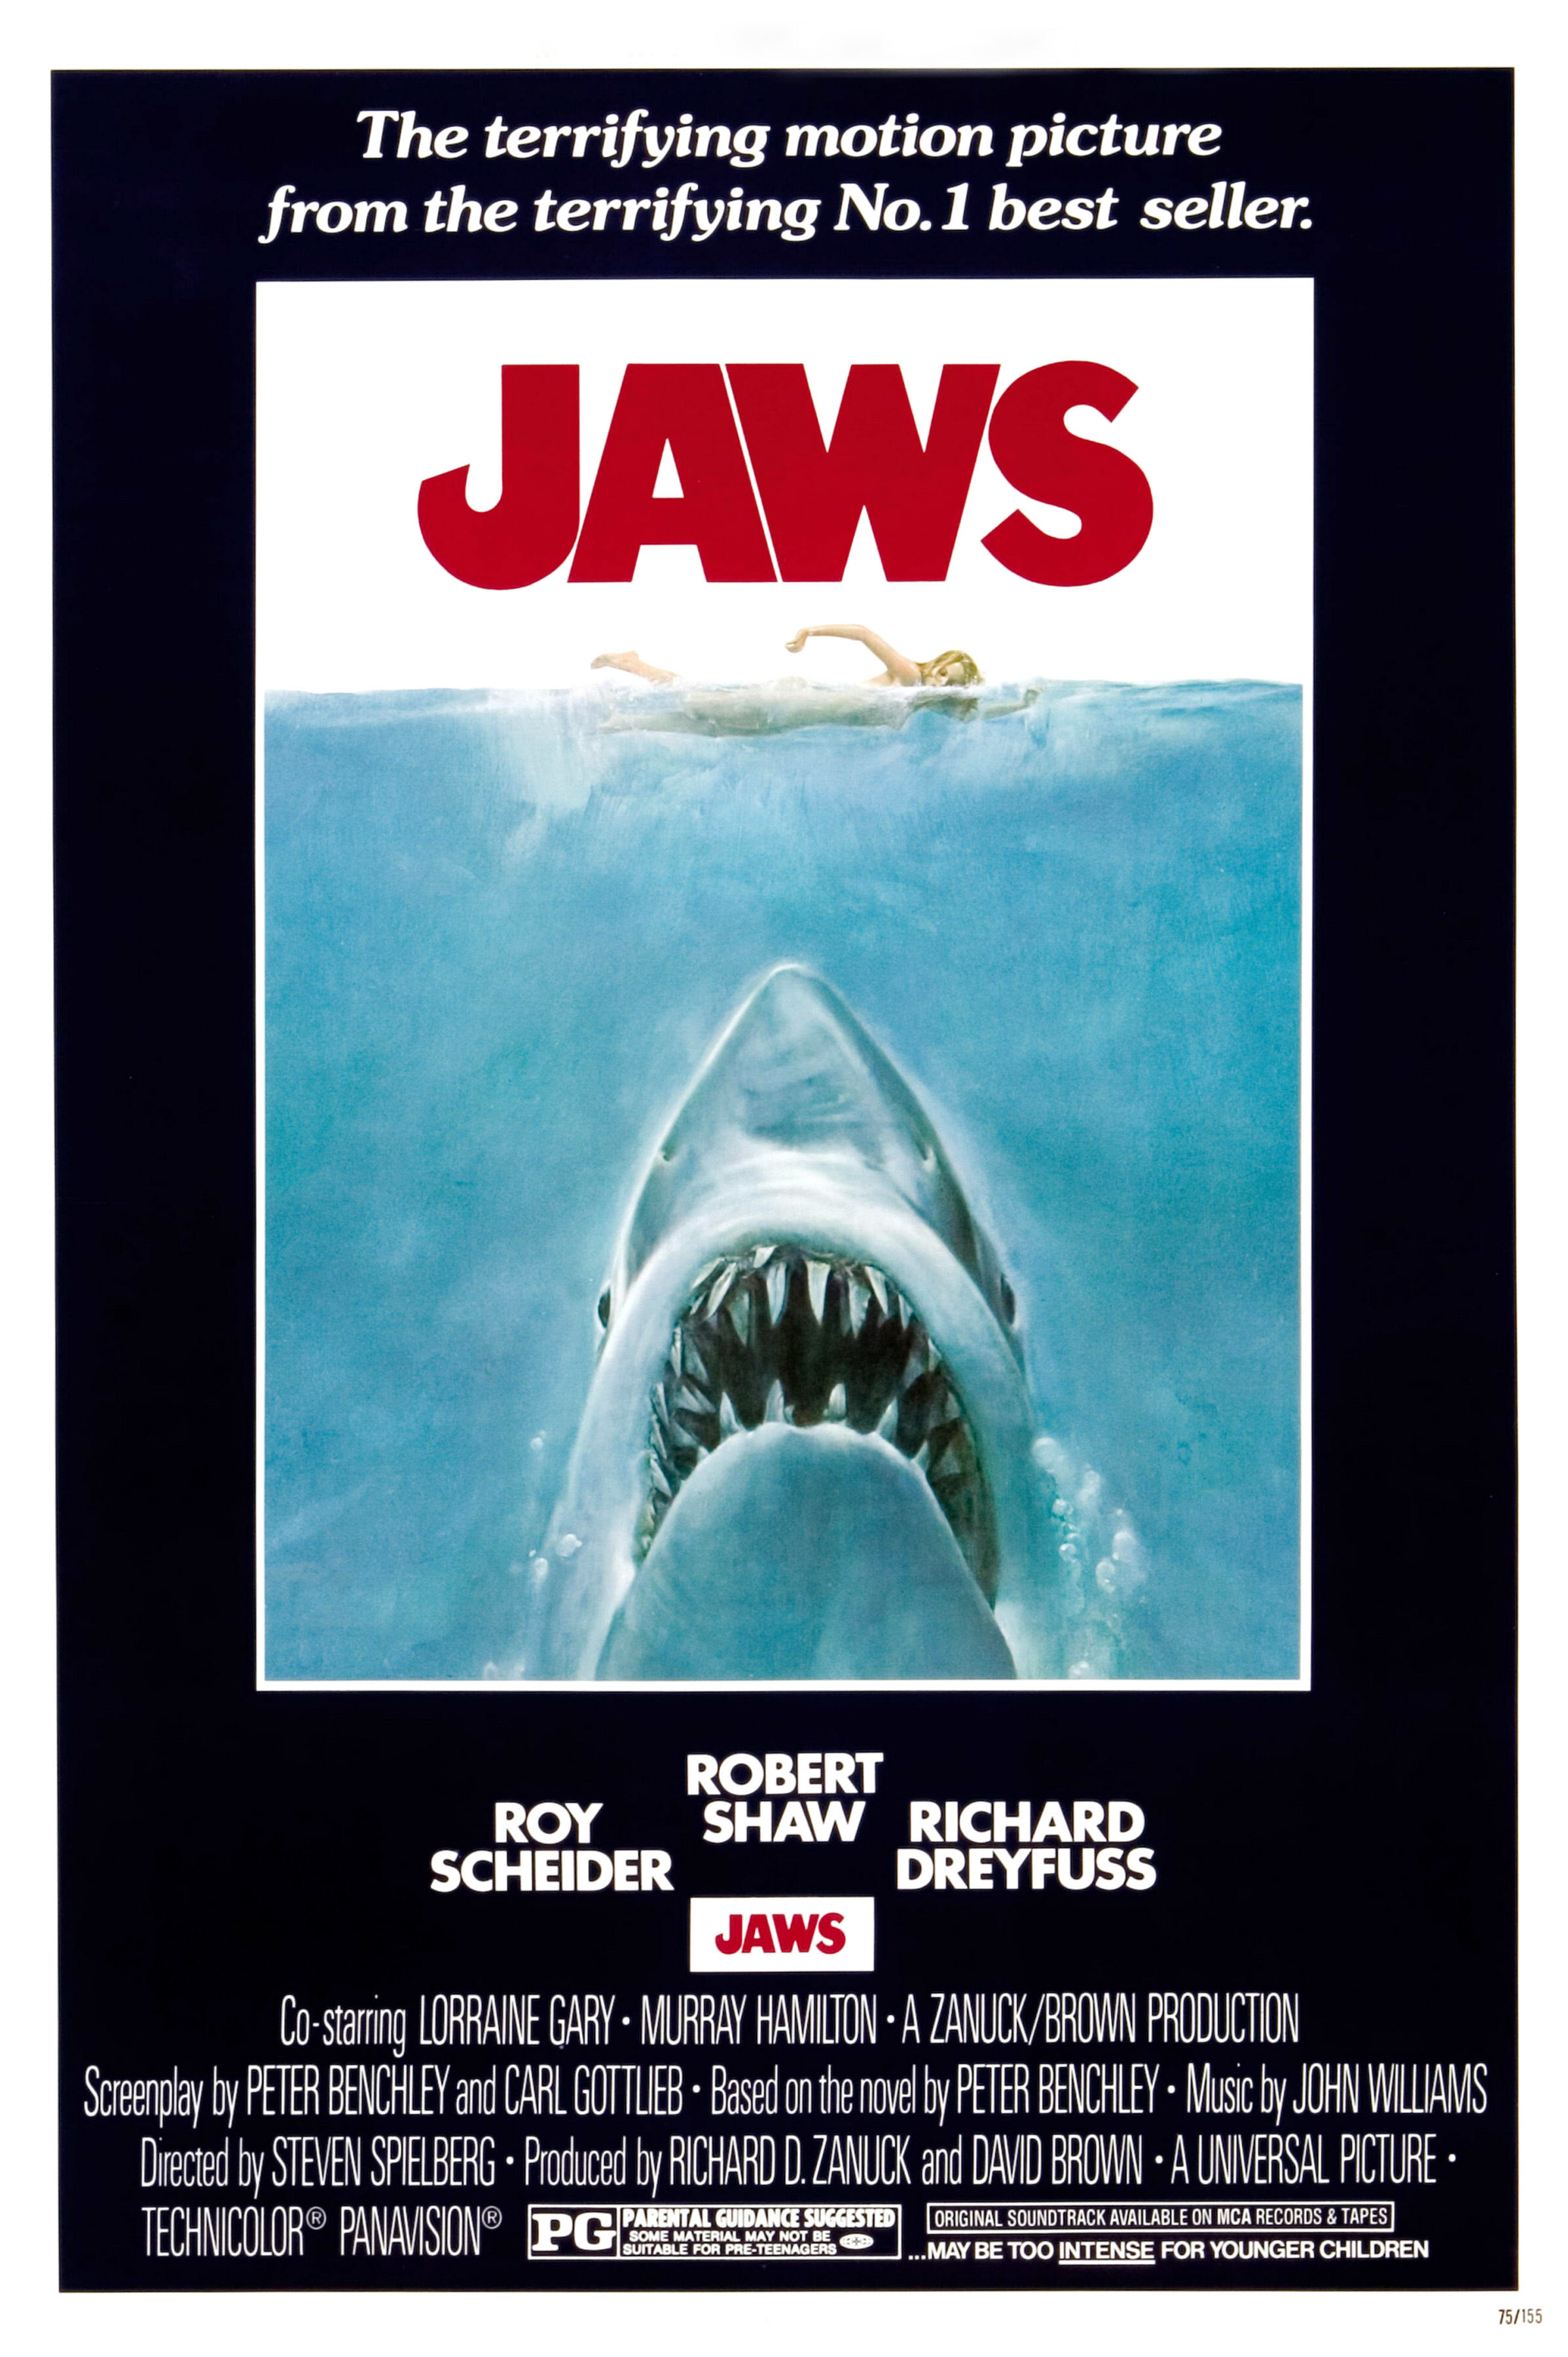 The theatrical poster of &quot;Jaws&quot;